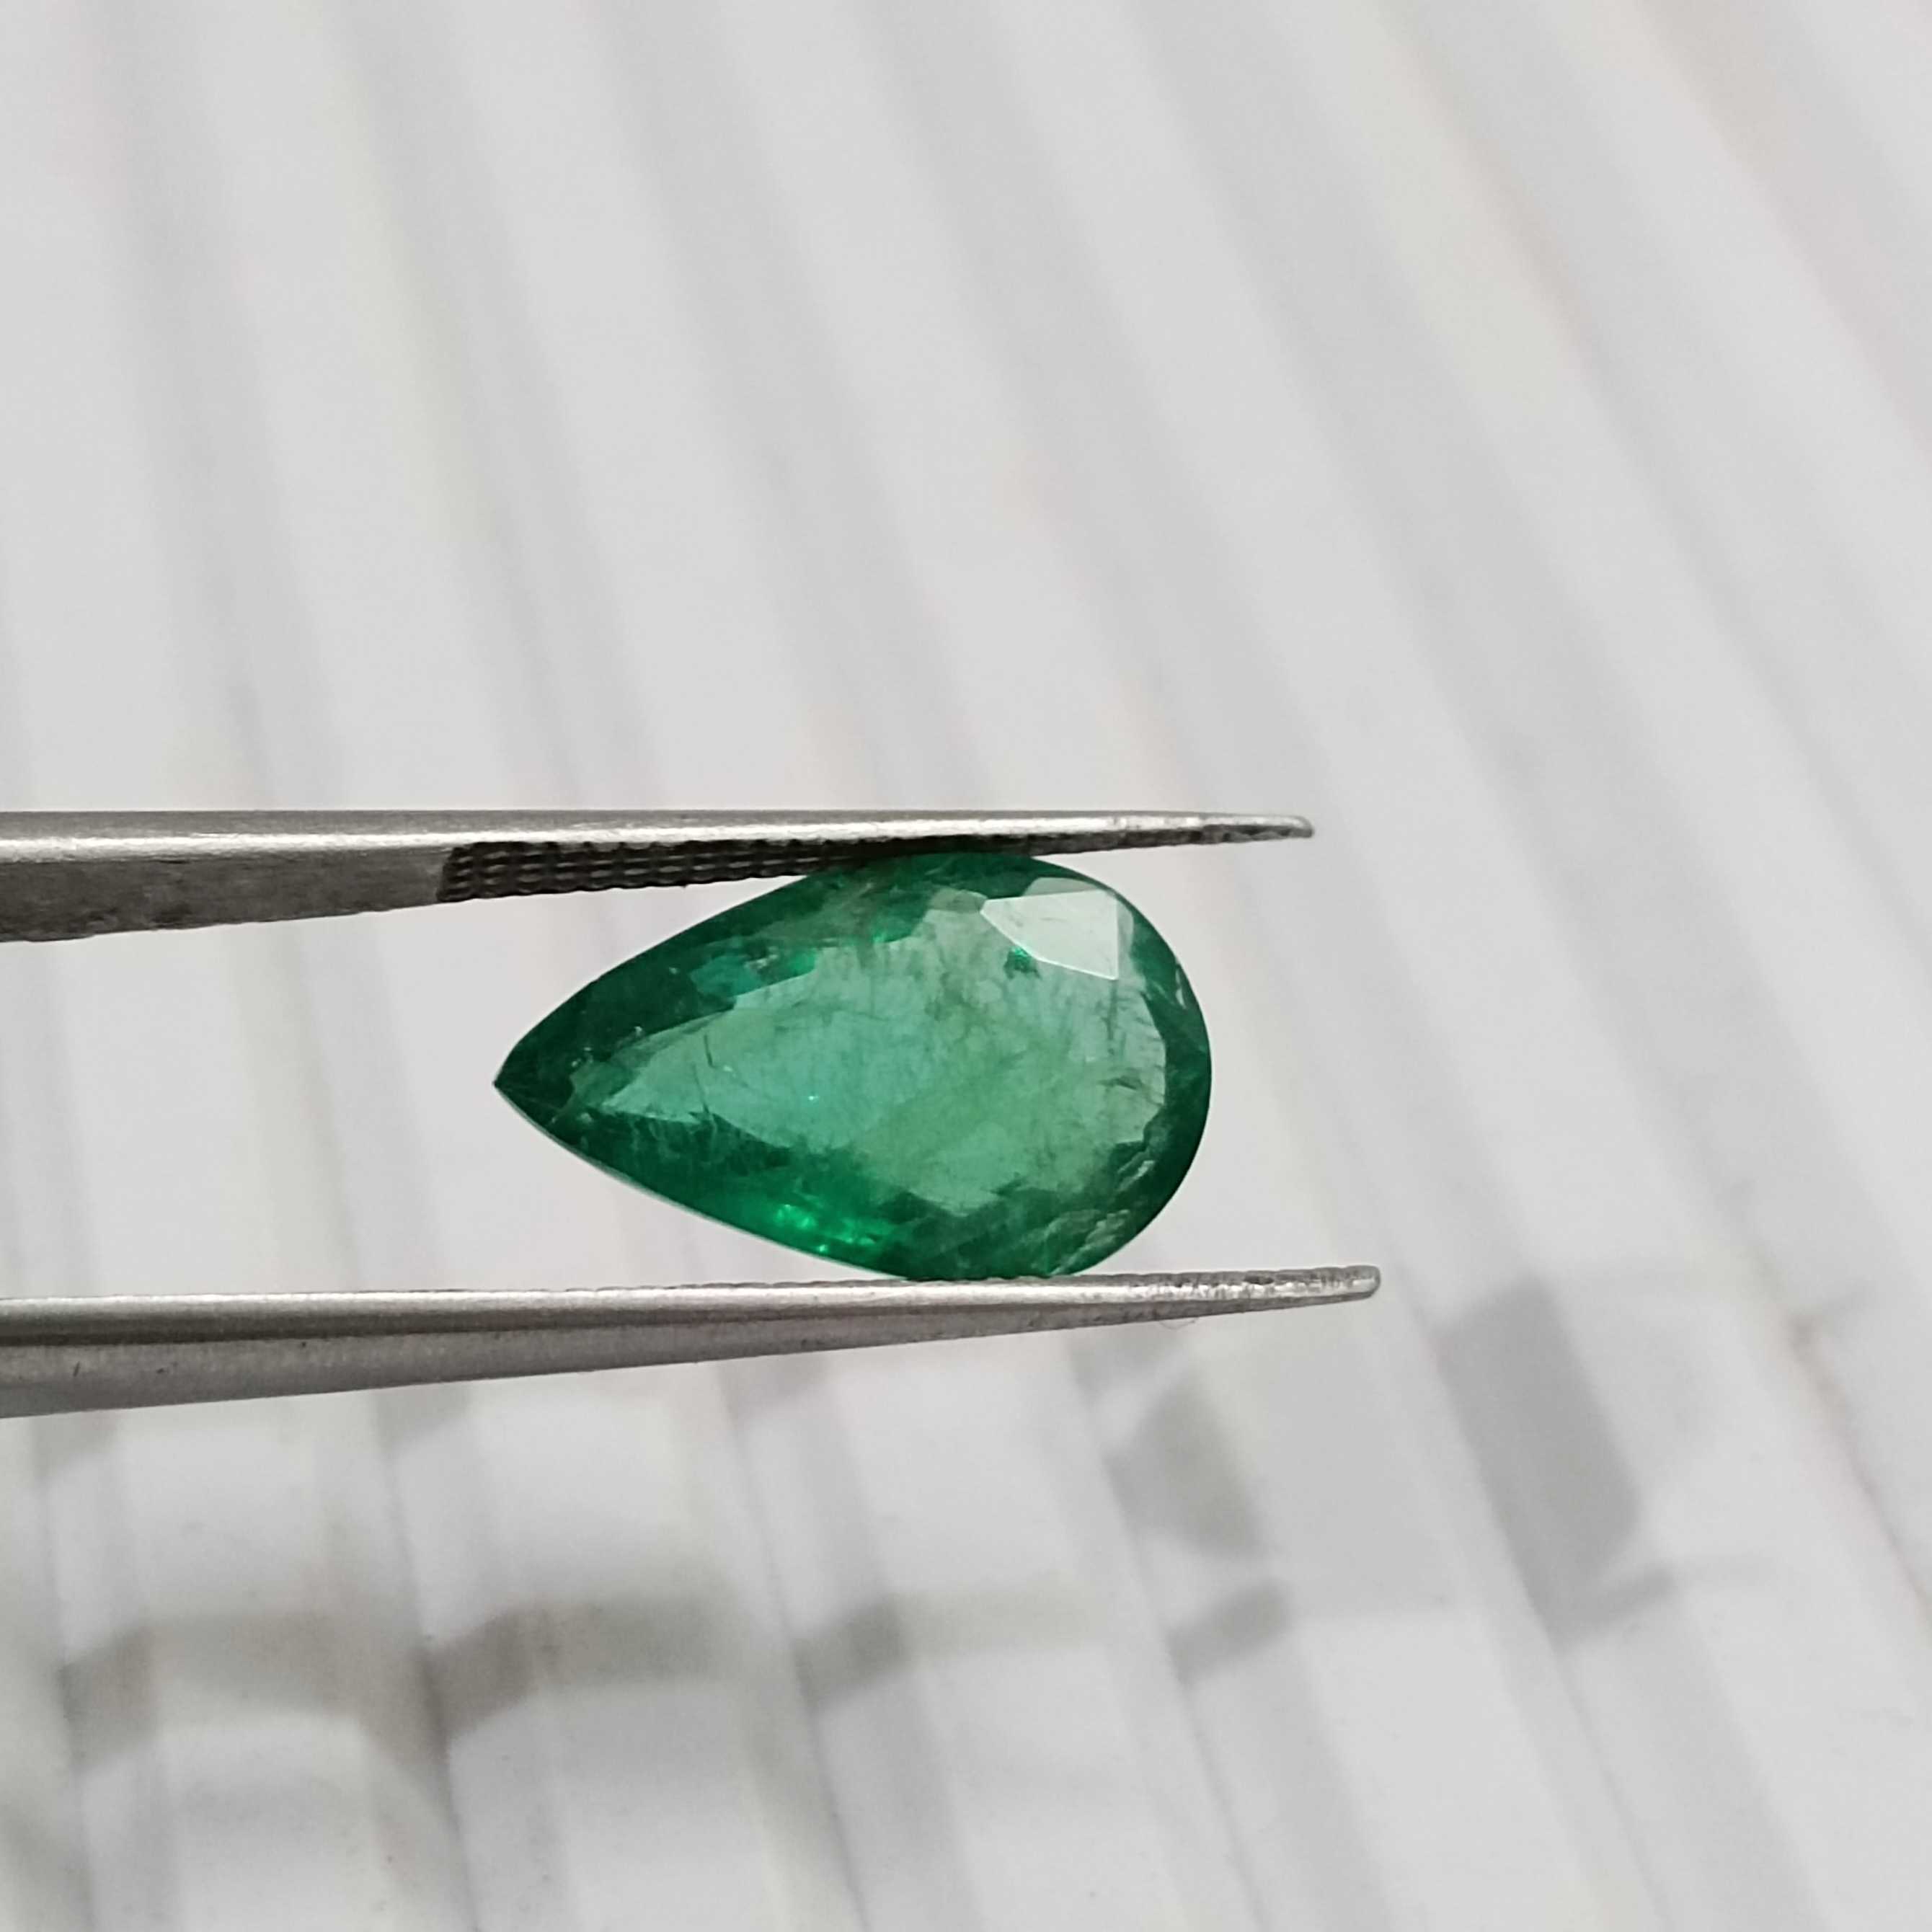 2.93ct saturated golden green pear shape emerald